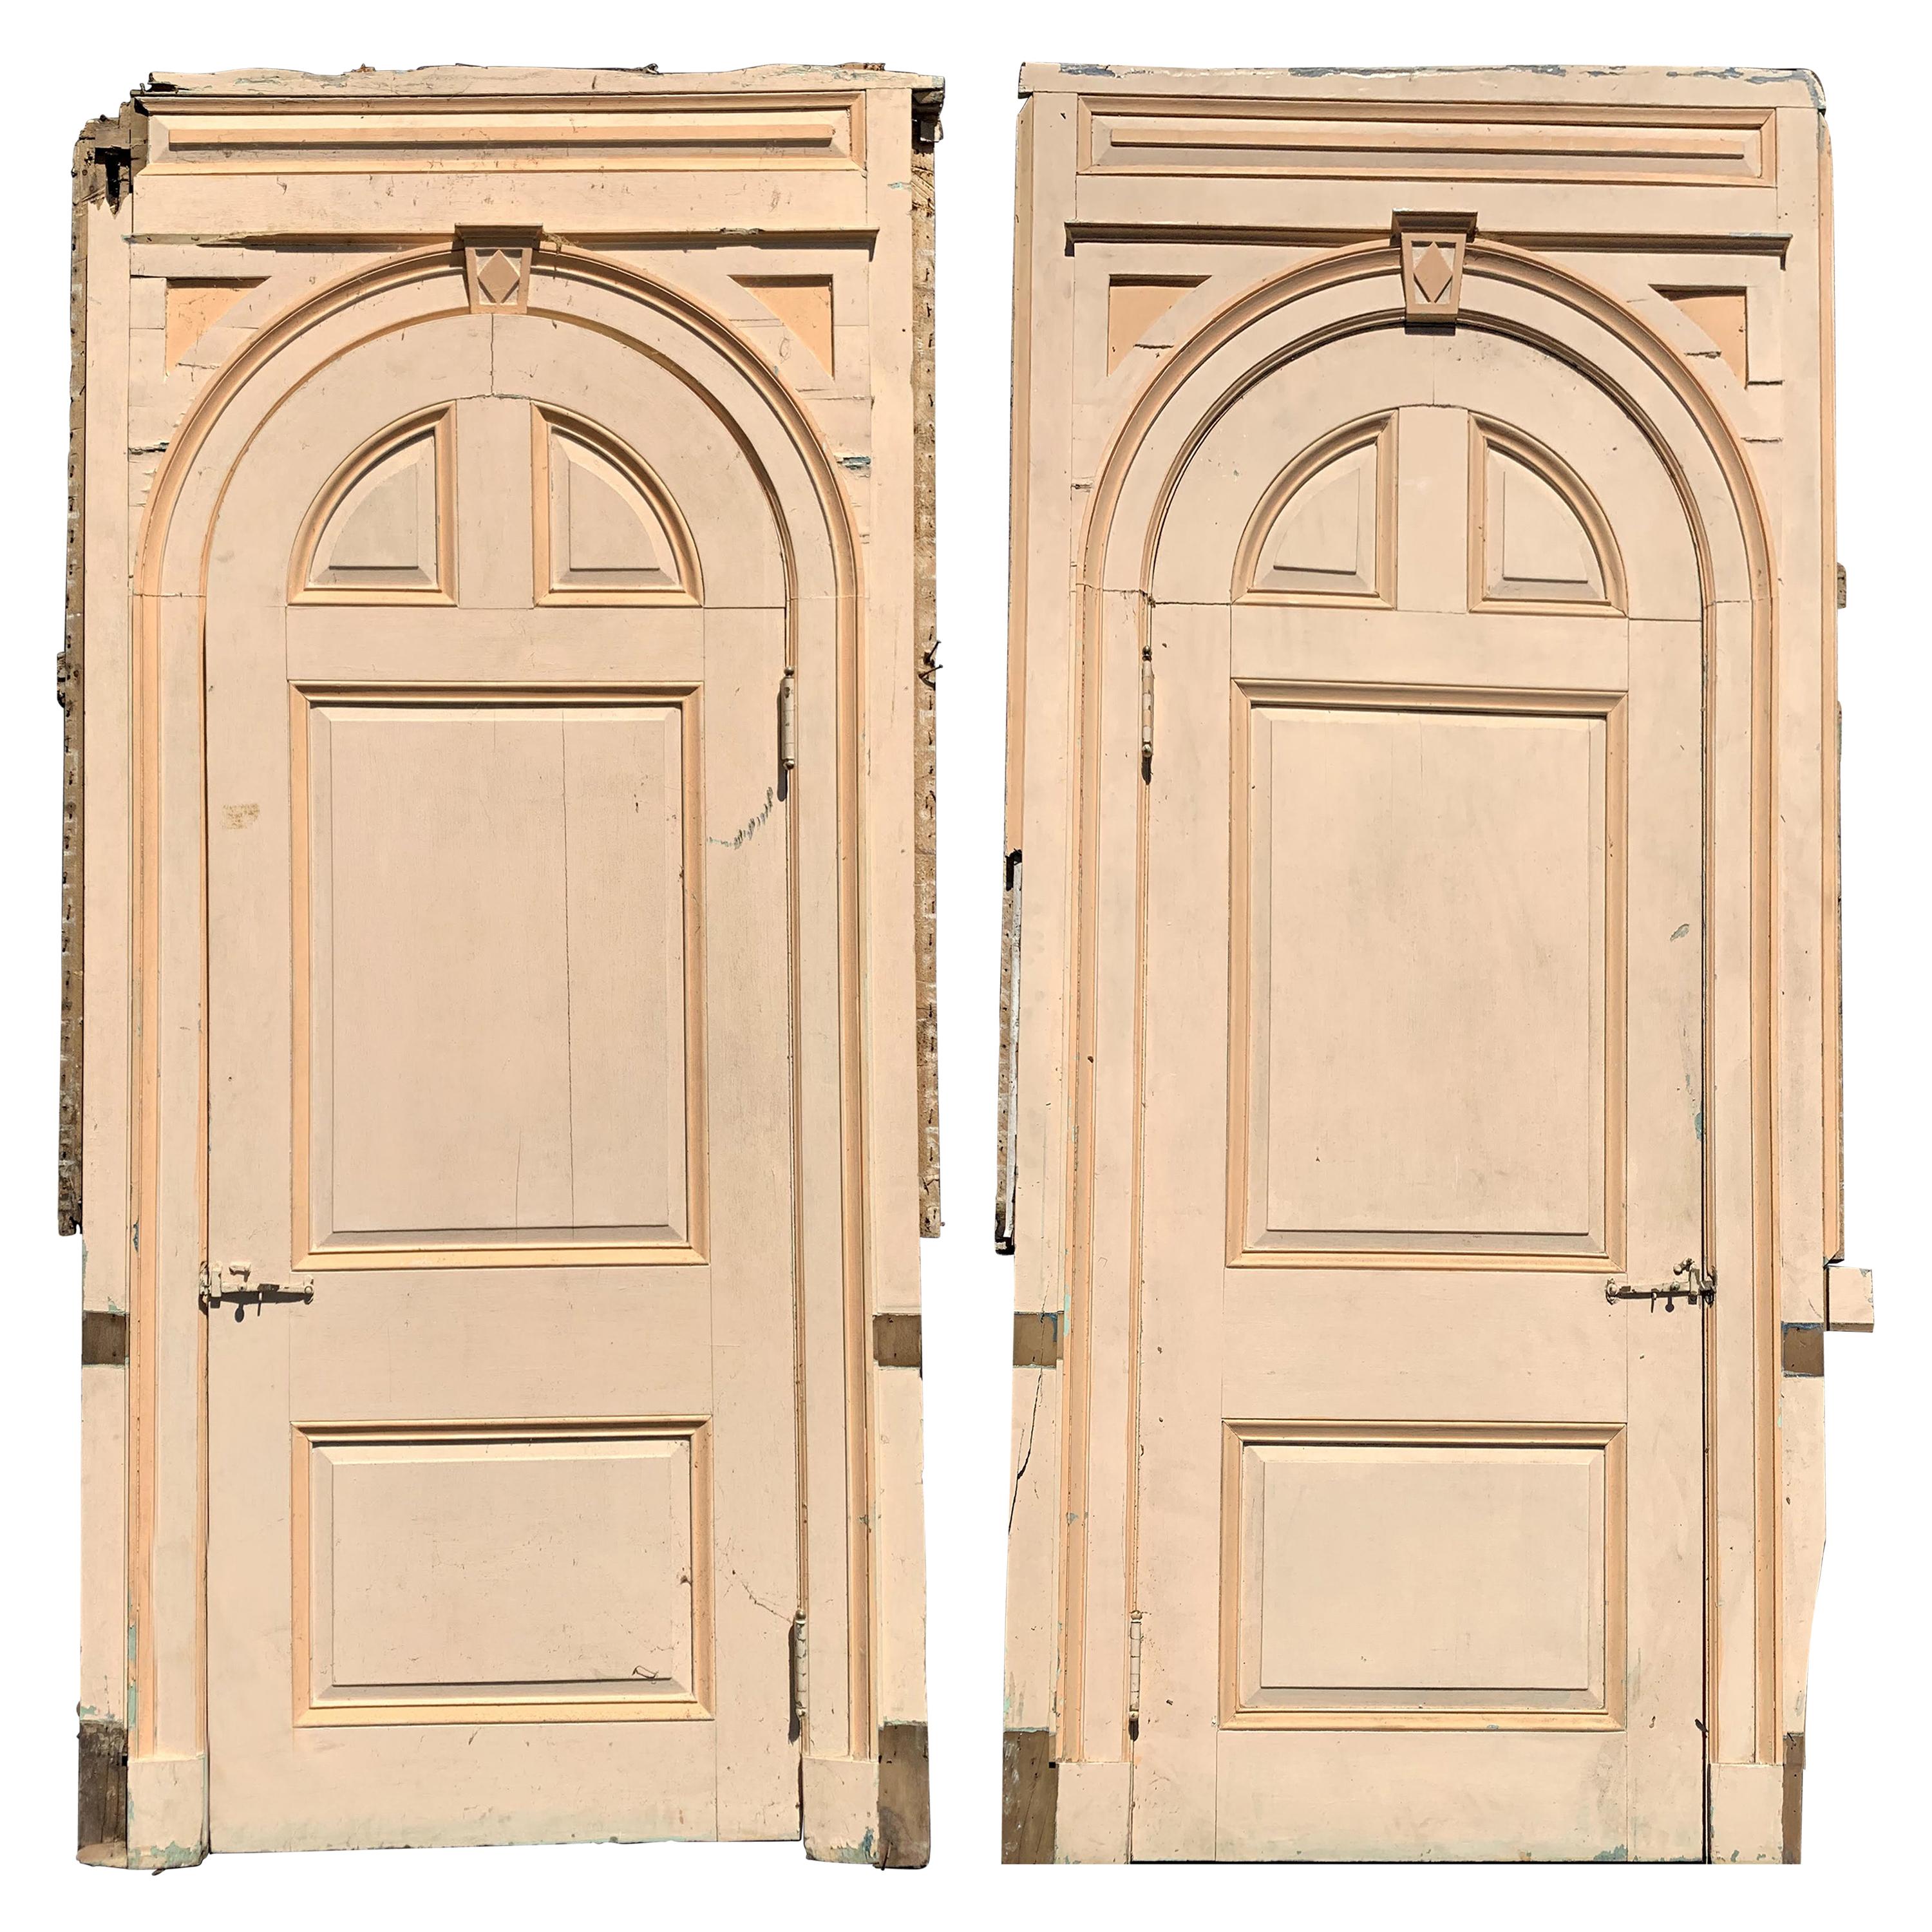 Pair of 19th Century Paneled Arched Top Doors from Manchester by the Sea, MA